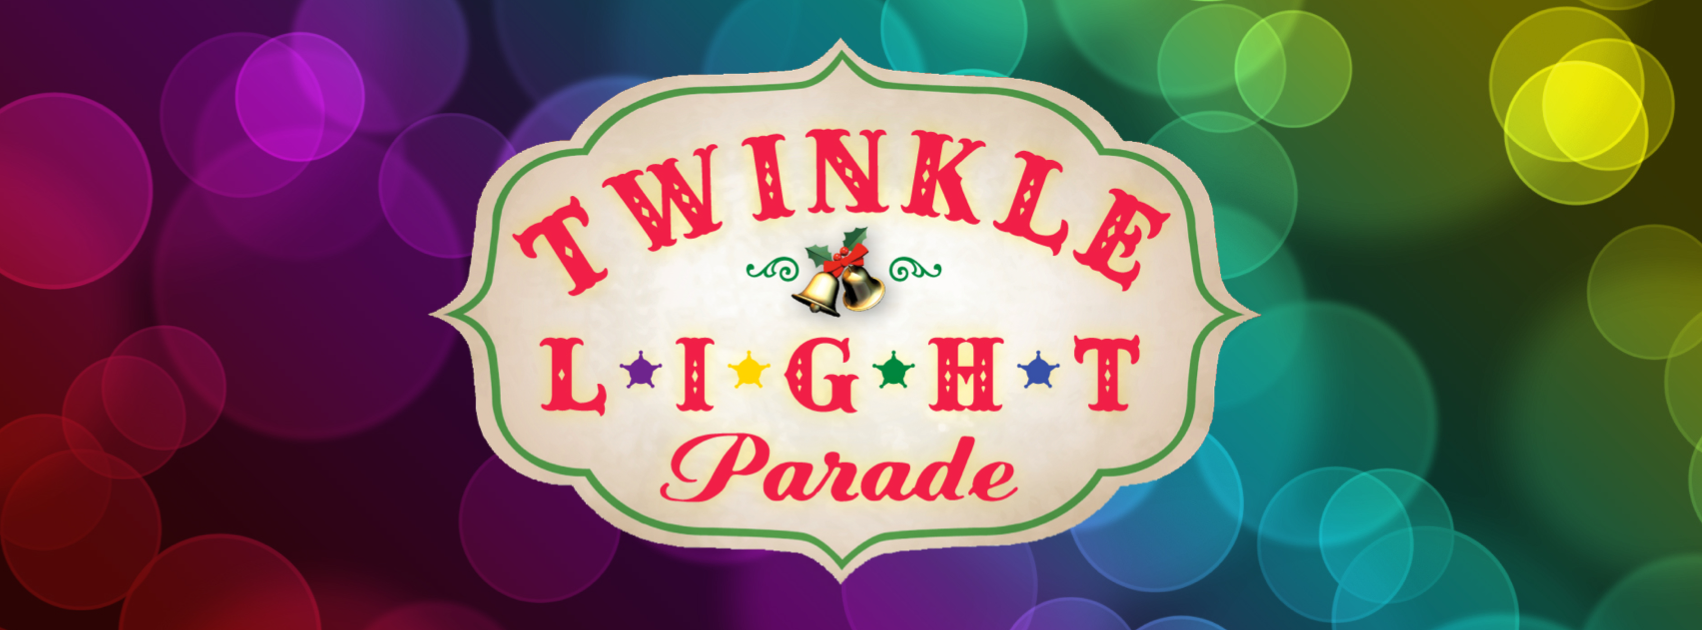 Twinkle Light Cover Banner 2017